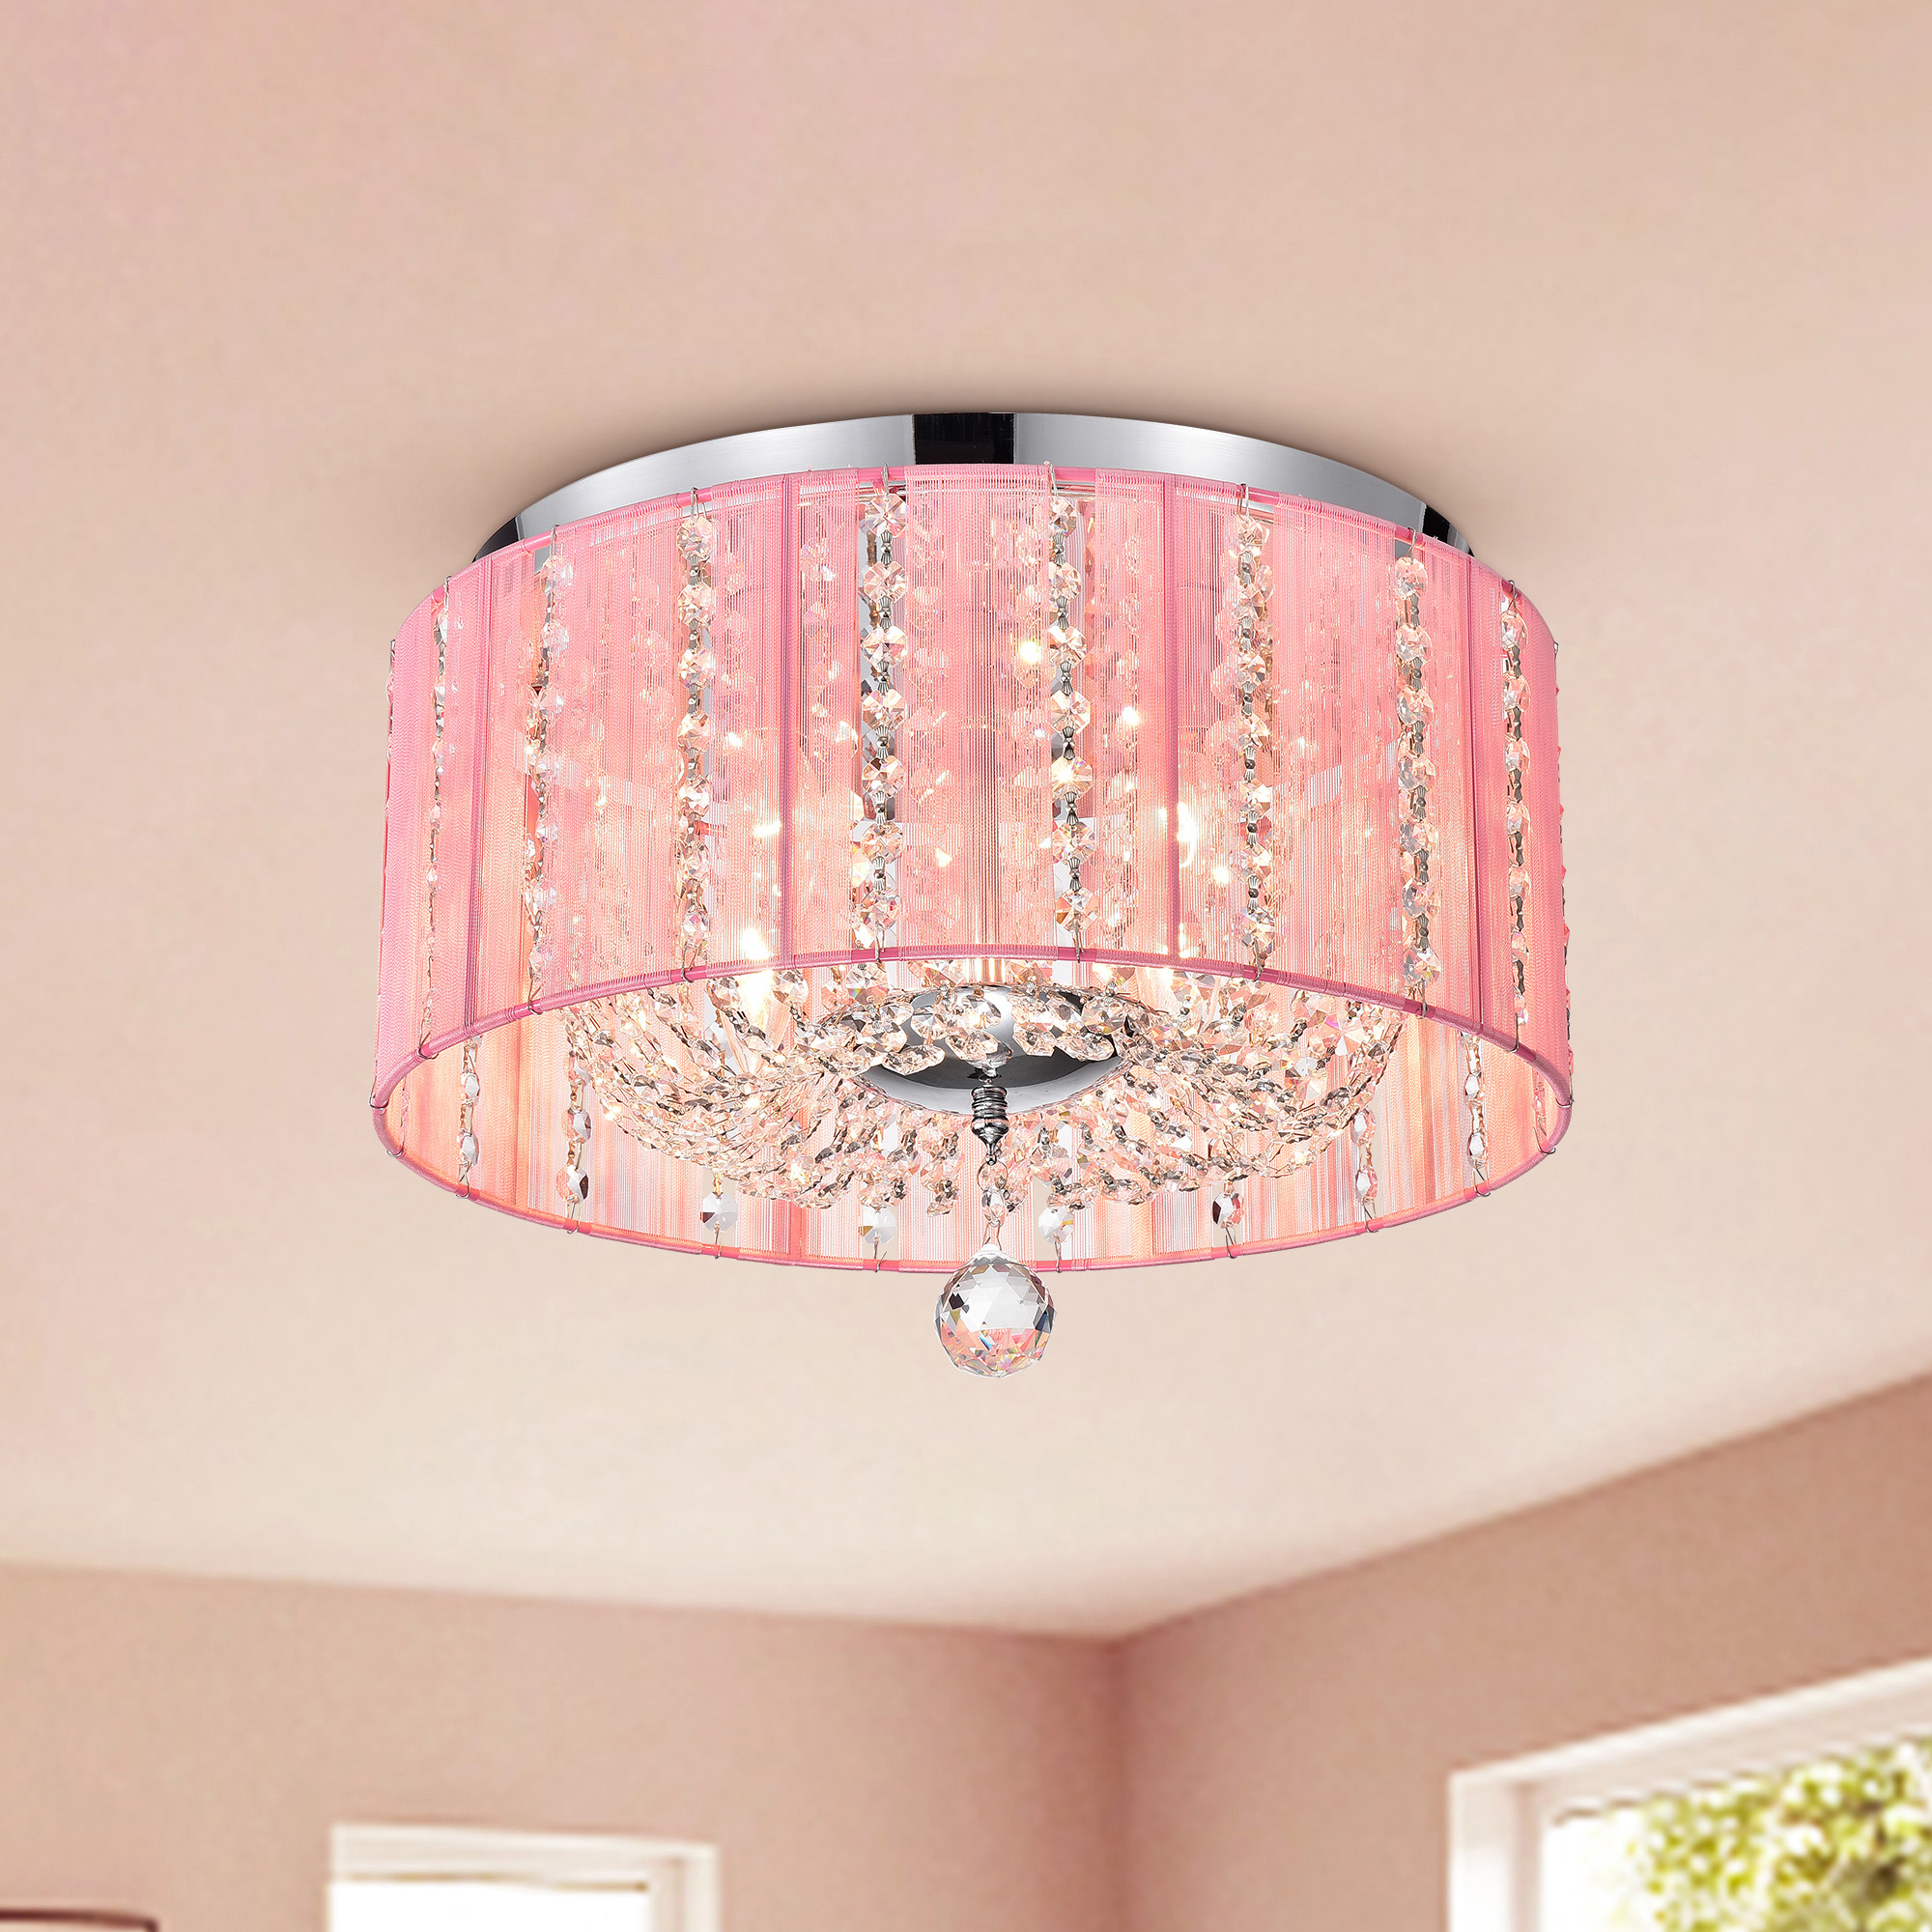 Addison 16 in. 4-Light Indoor Chrome and Pink Finish Flush Mount Ceiling Light with Light Kit